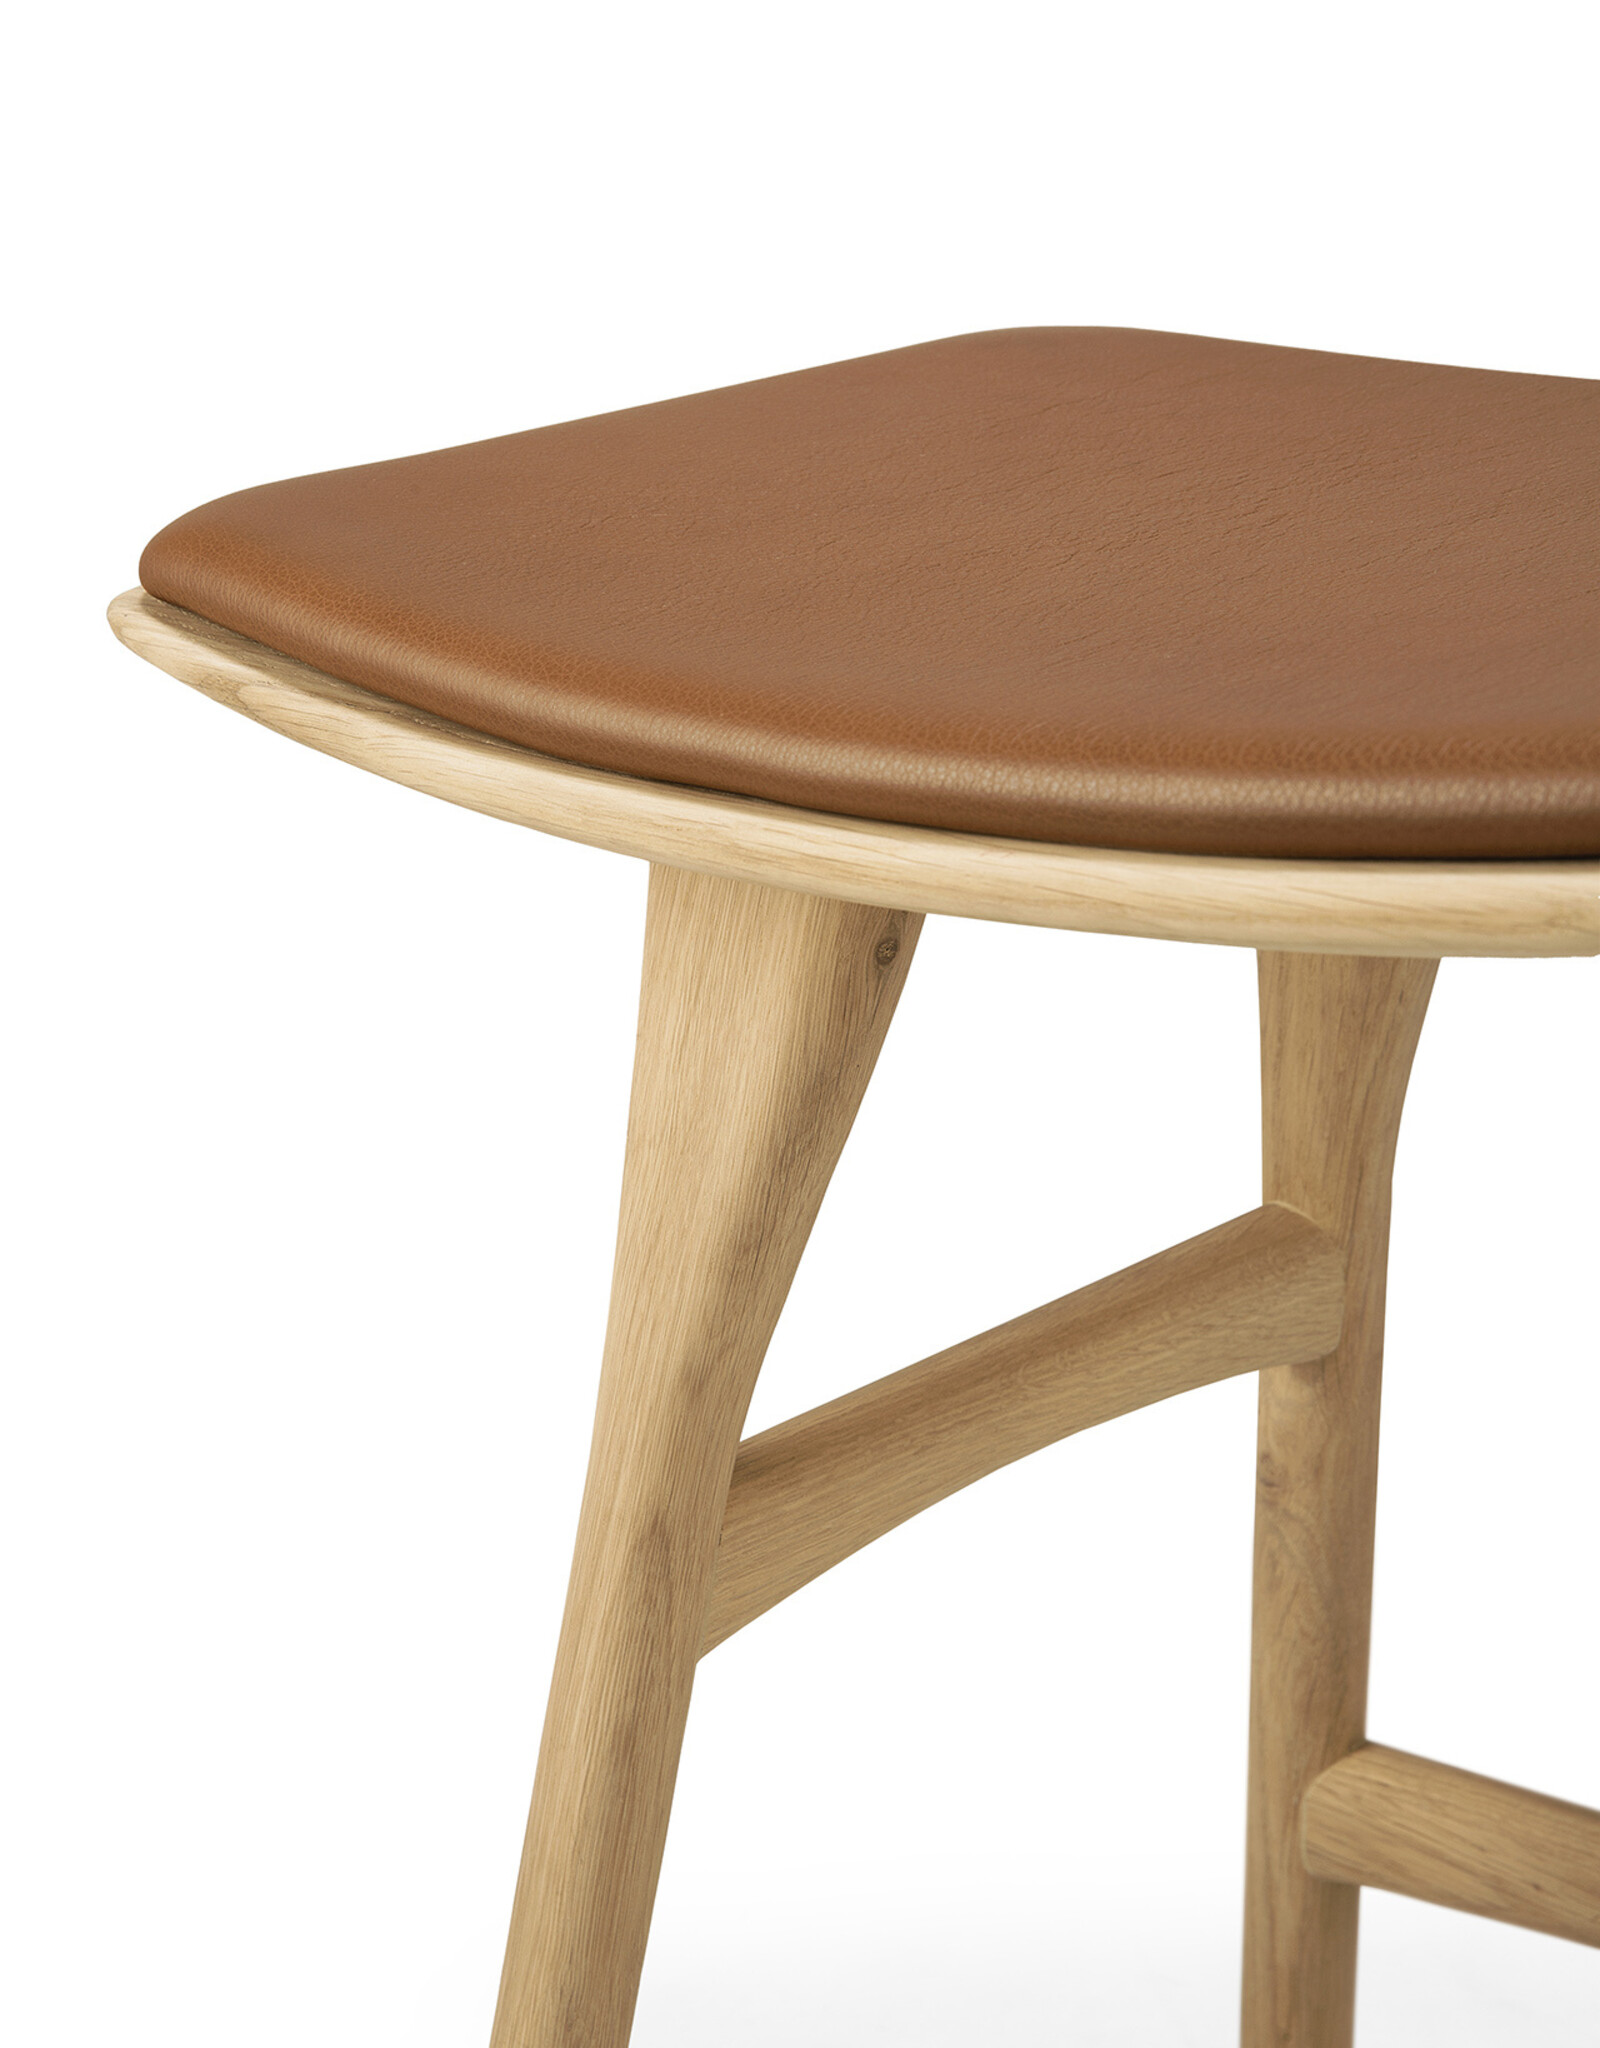 Osso Stool, Oak and Cognac Leather